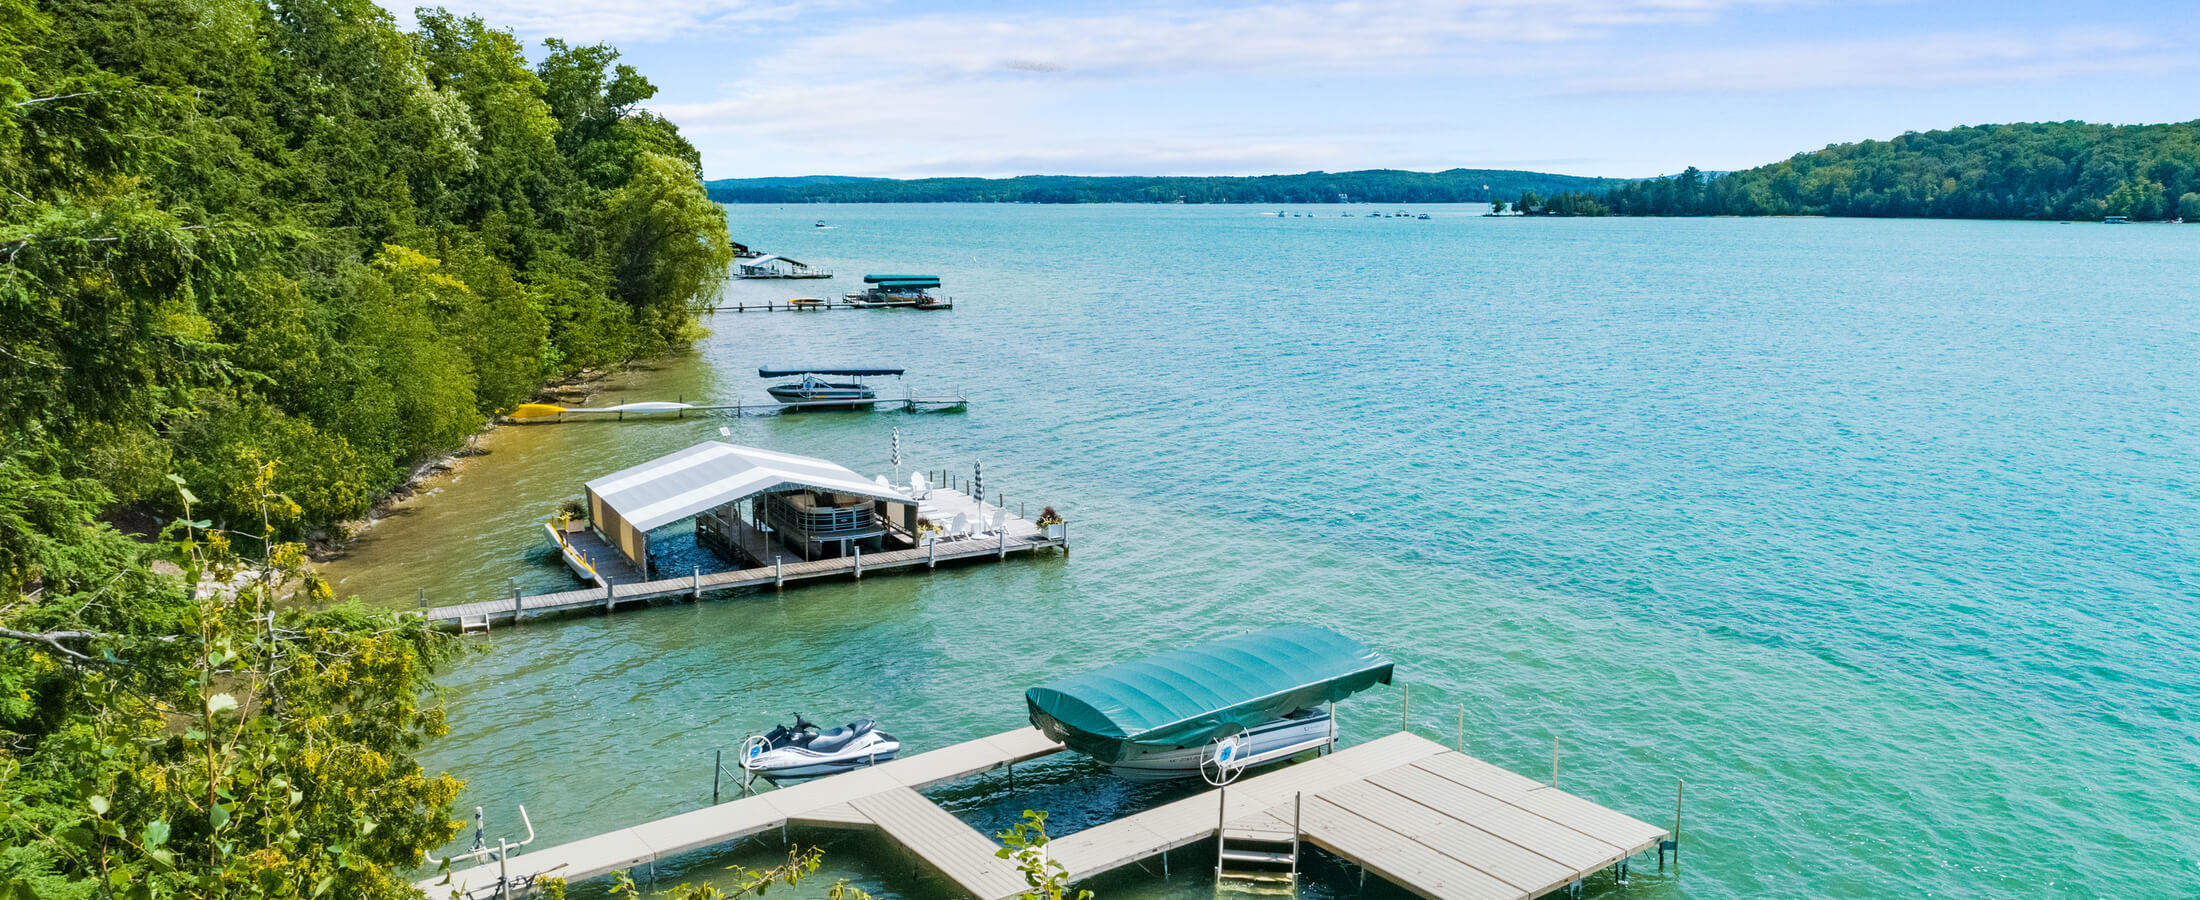 Homes for Sale on Douglas Lake in Northern Michigan